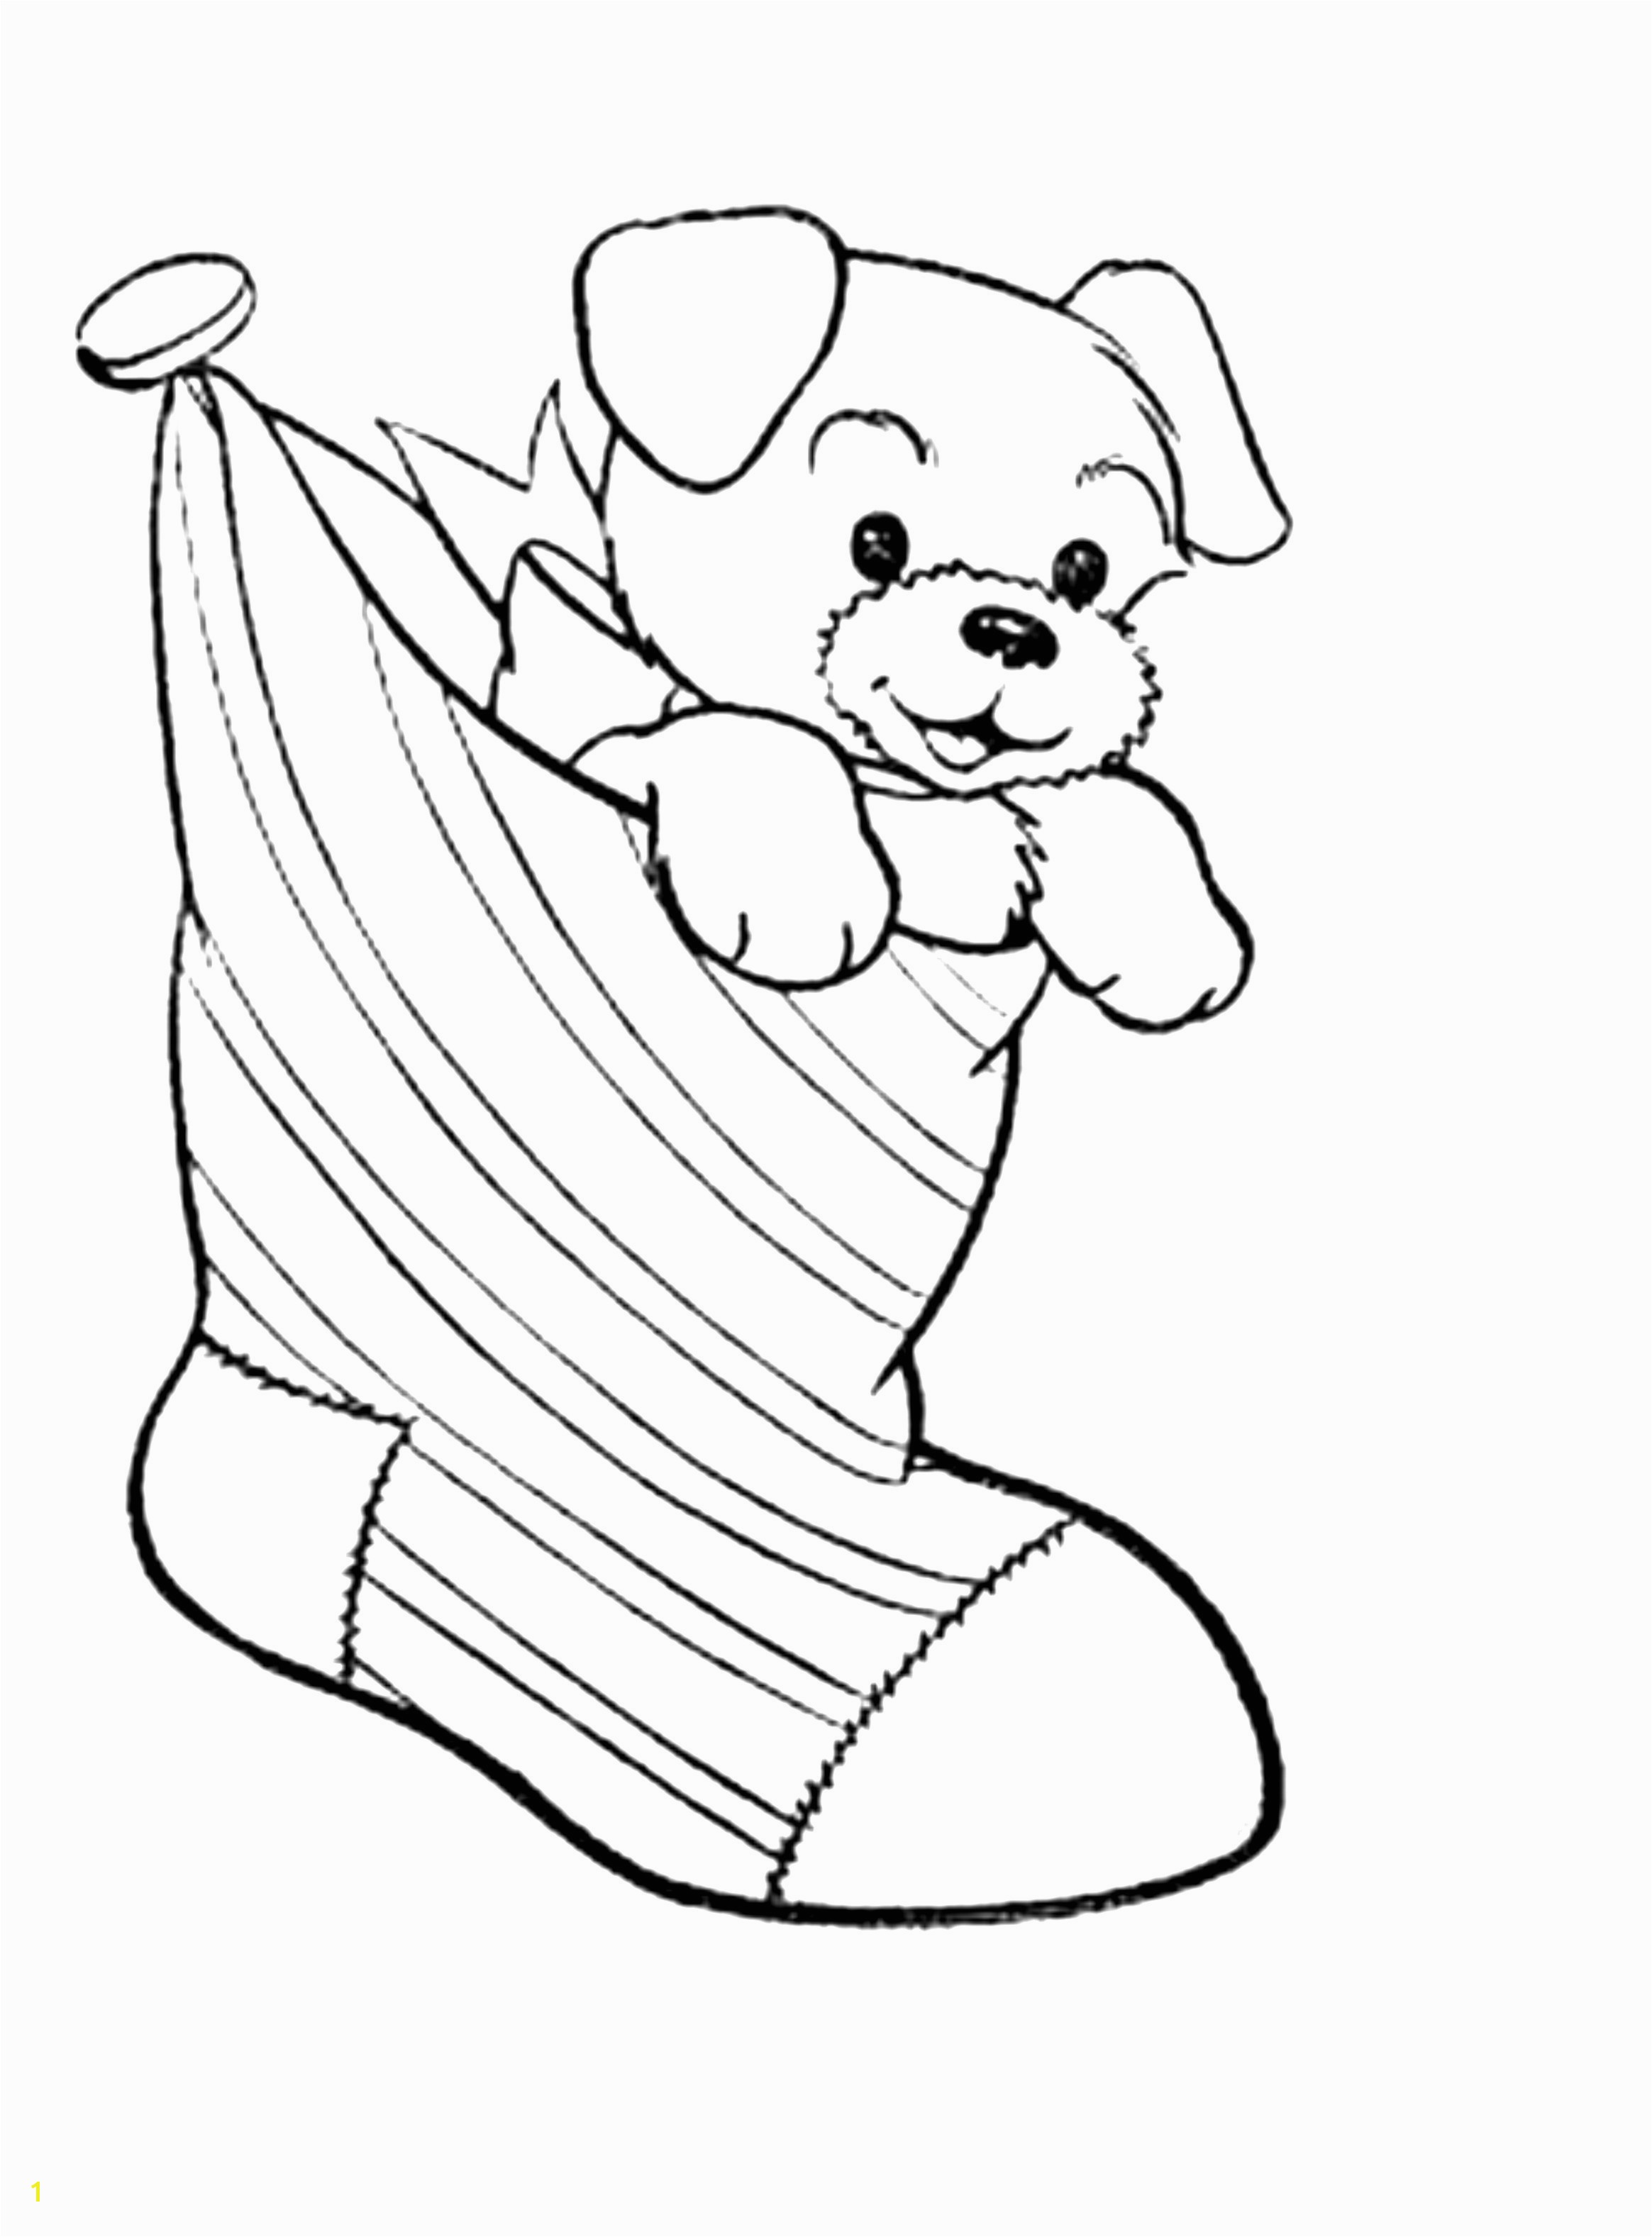 Poptropica Coloring Pages Puppy Coloring Page Free Reproducible Coloring Pages Awesome Crayola